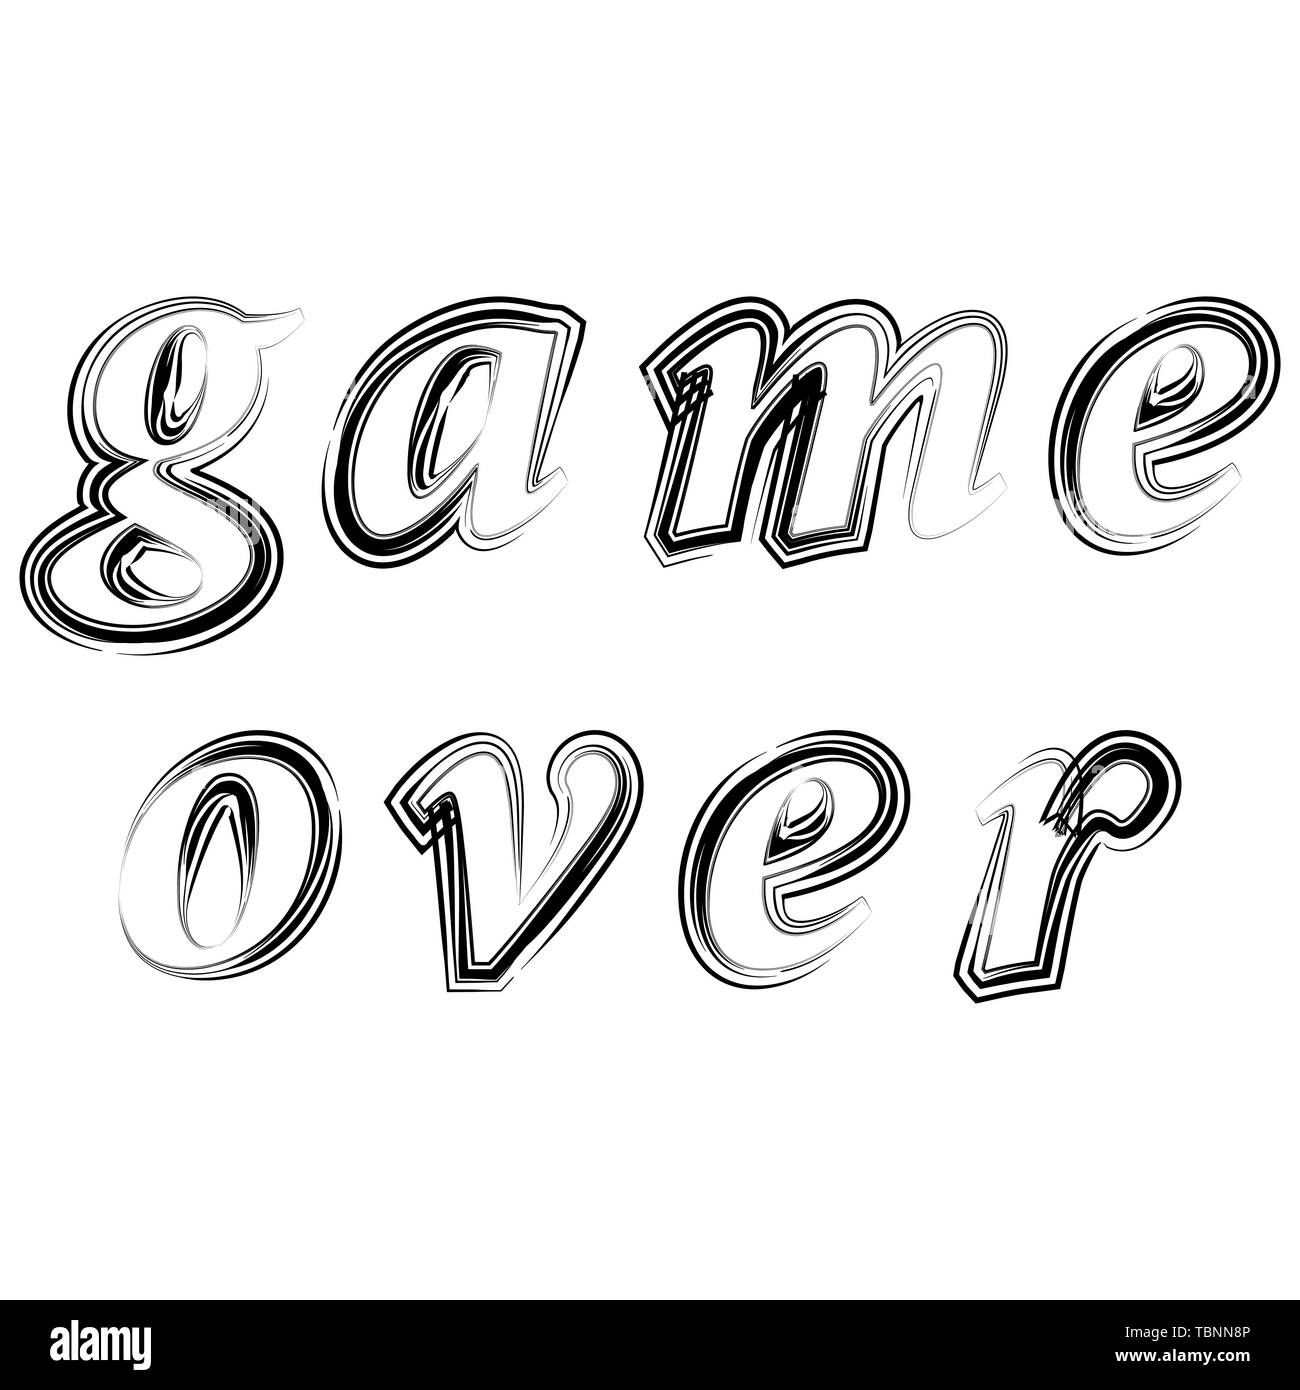 Ink Grunge Game Over Sign. Gaming Concept. Video Game Screen. Typography Design Poster with Lettering Stock Photo